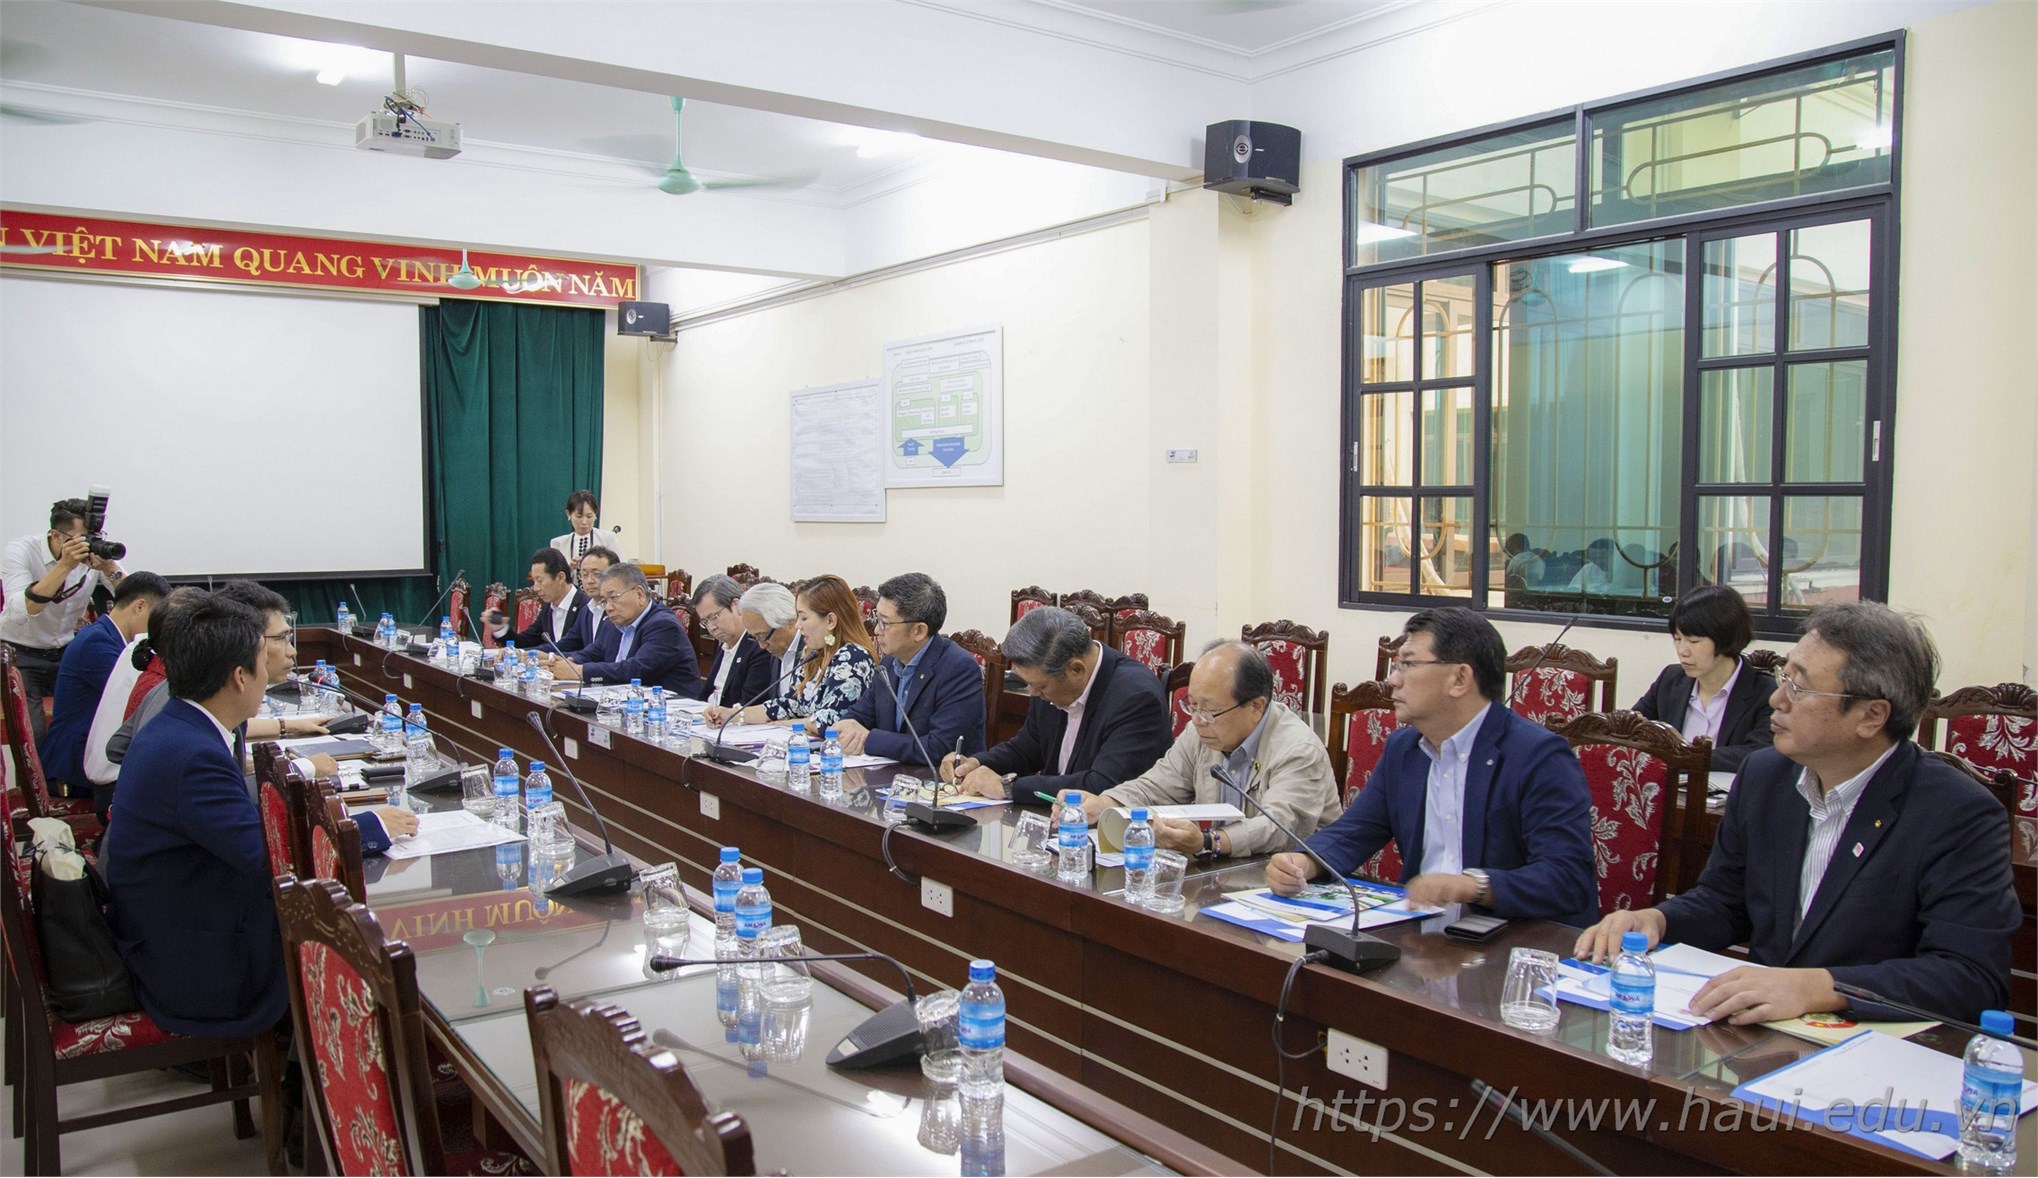 Hanoi University of Industry expands its cooperation with Fukuoka Prefecture (Japan)